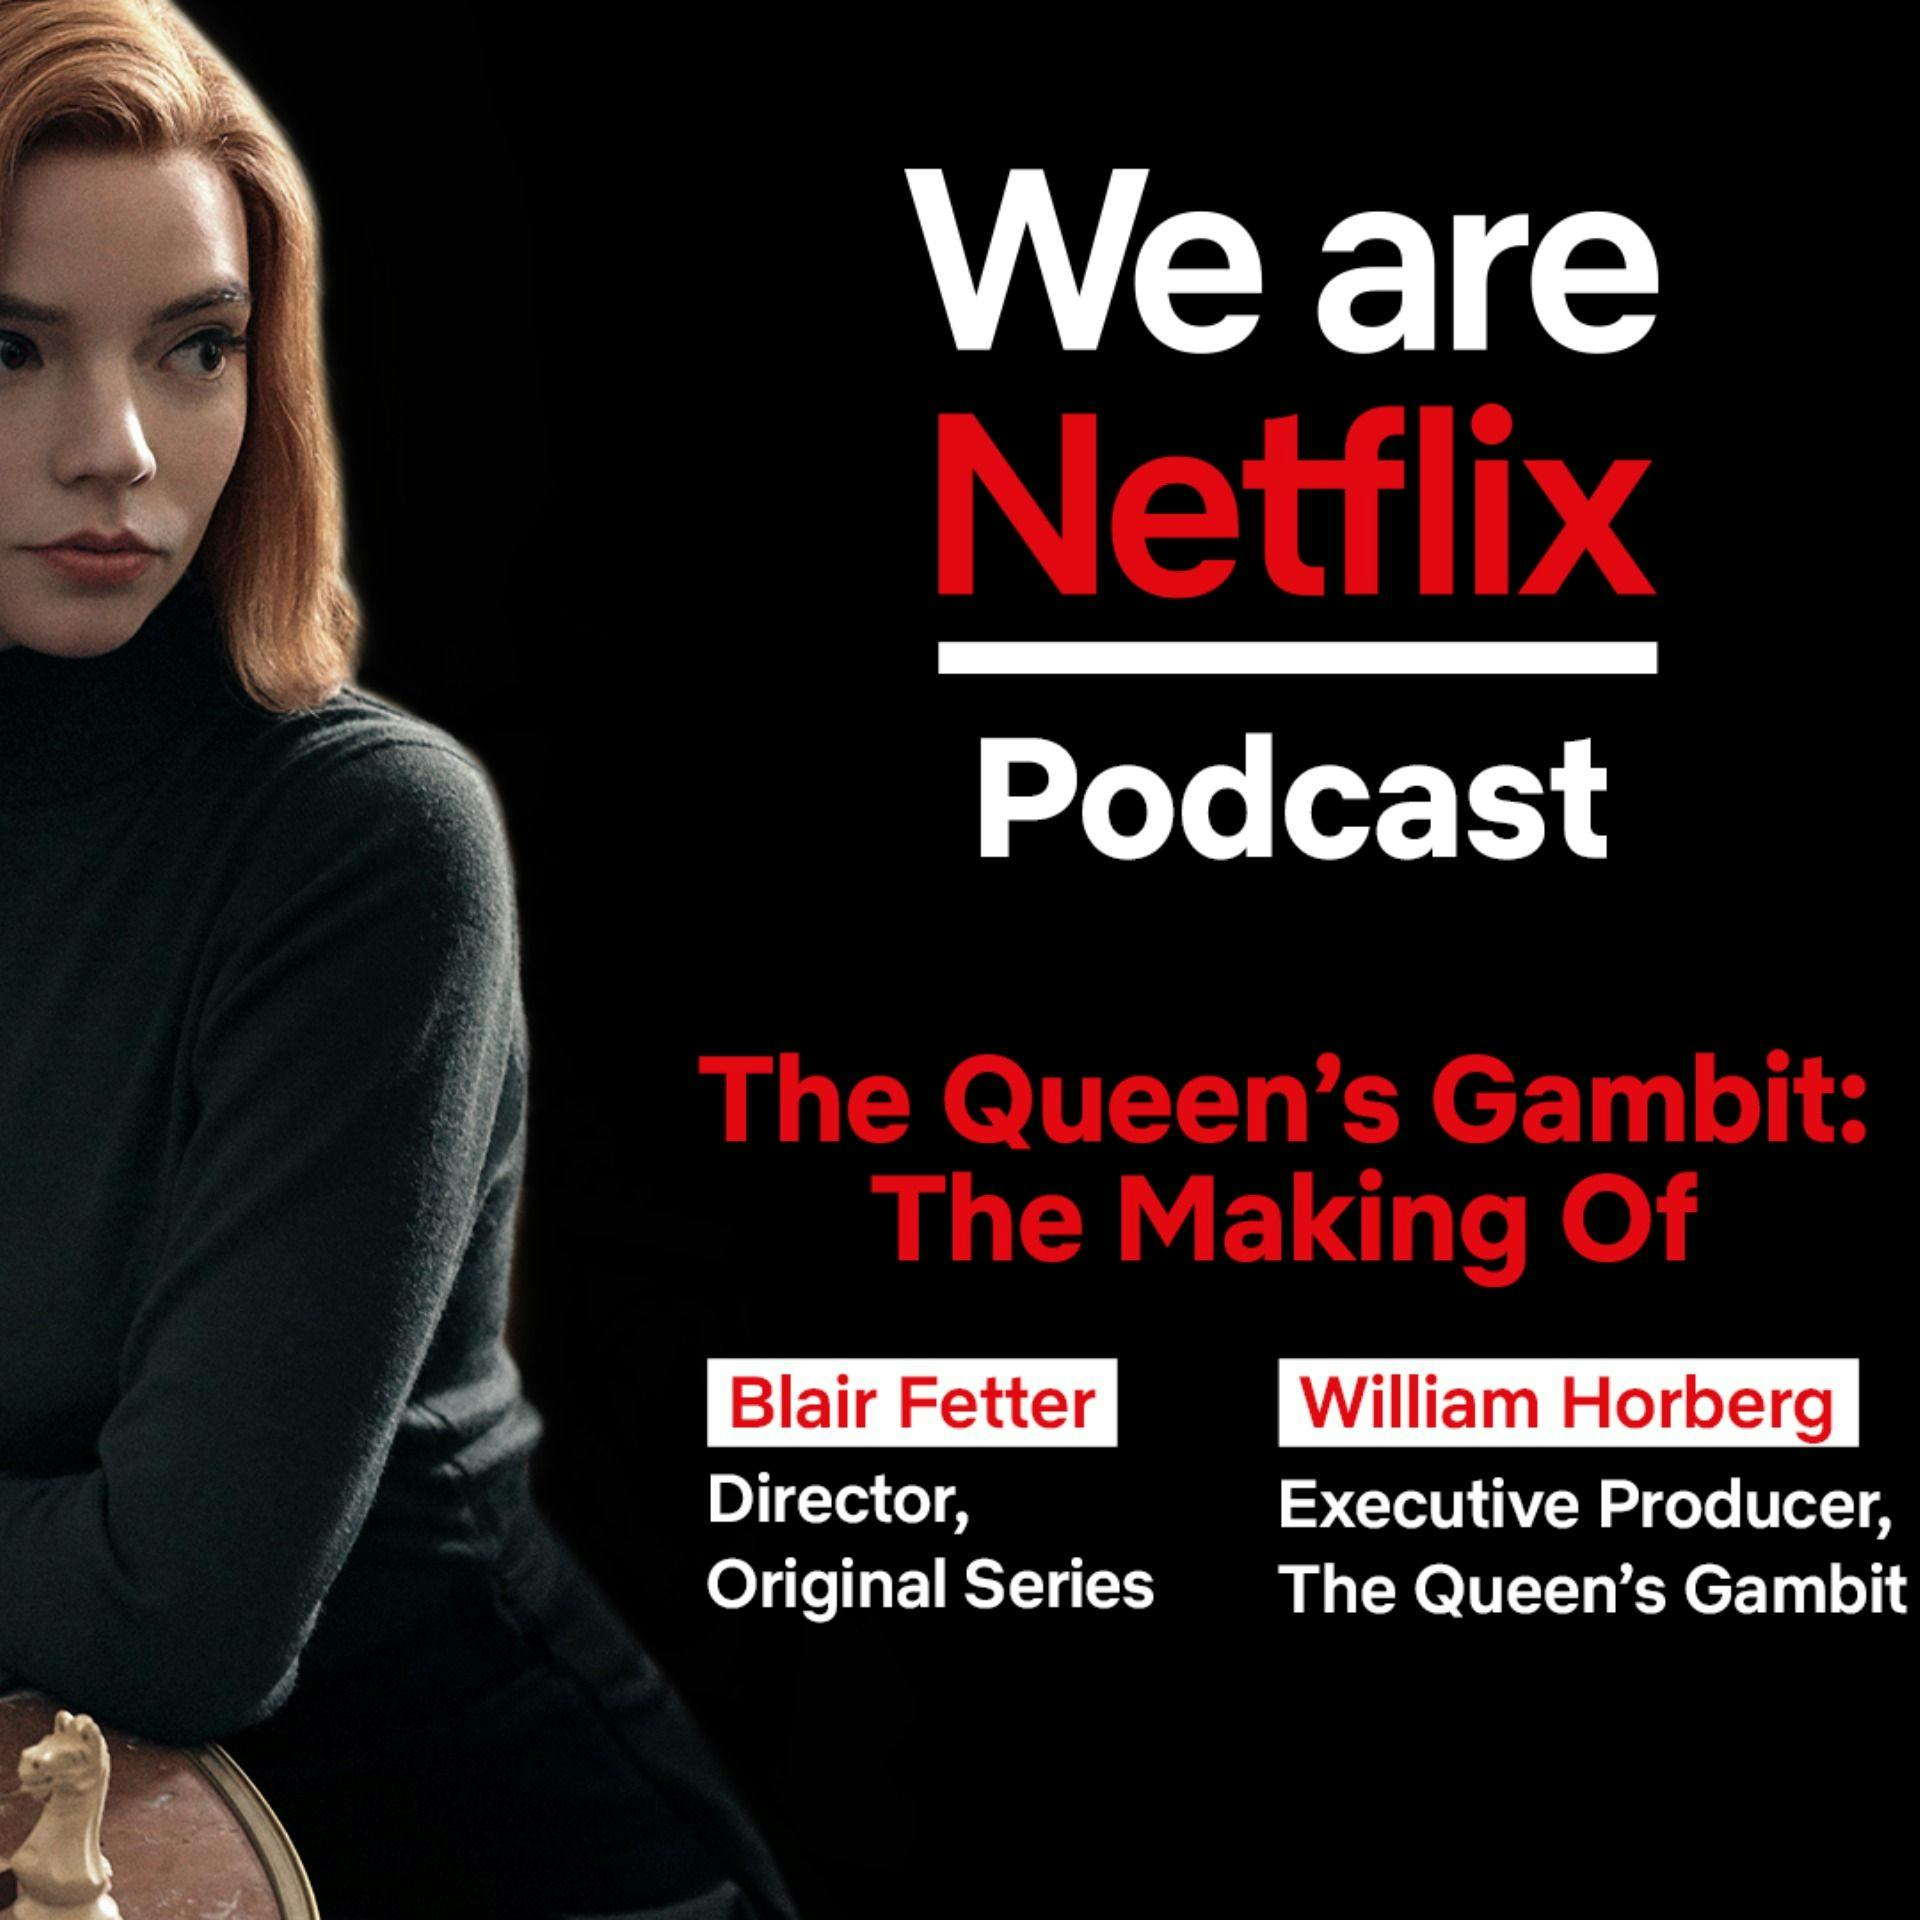 The Queen's Gambit: The Making Of